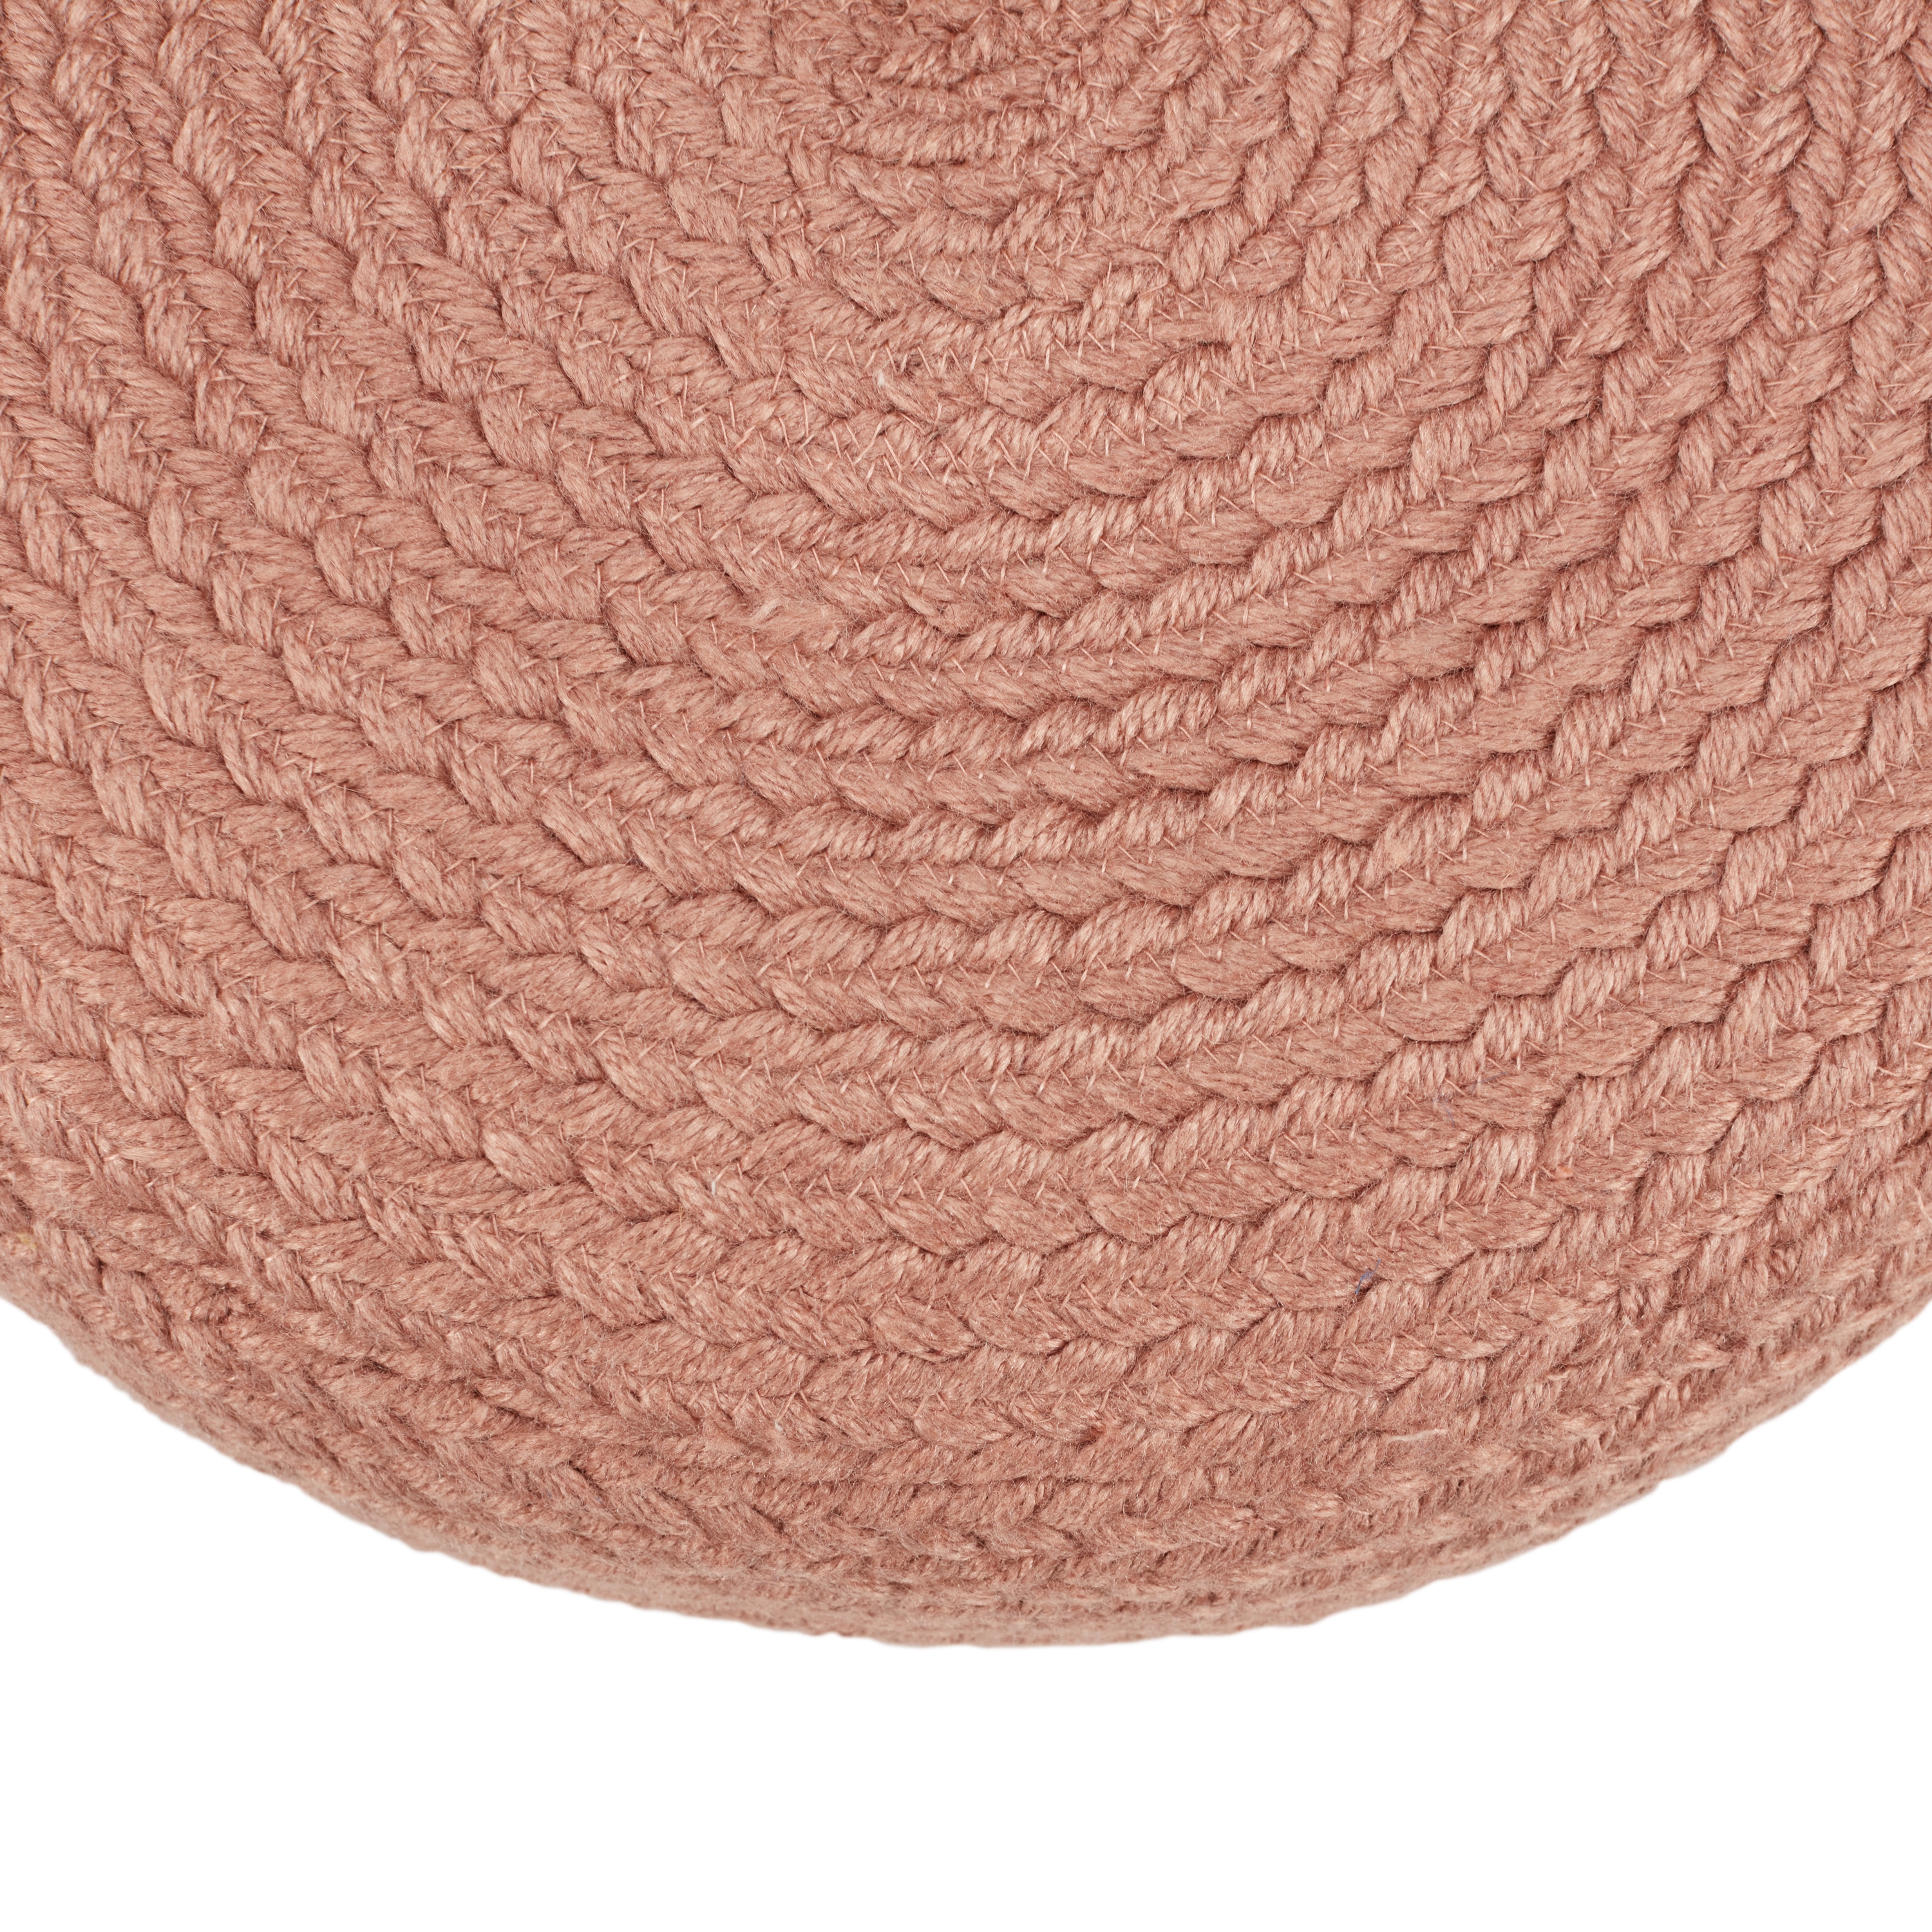 Vibe by Santa Rosa Indoor/ Outdoor Blush Cylinder Pouf - Image 1